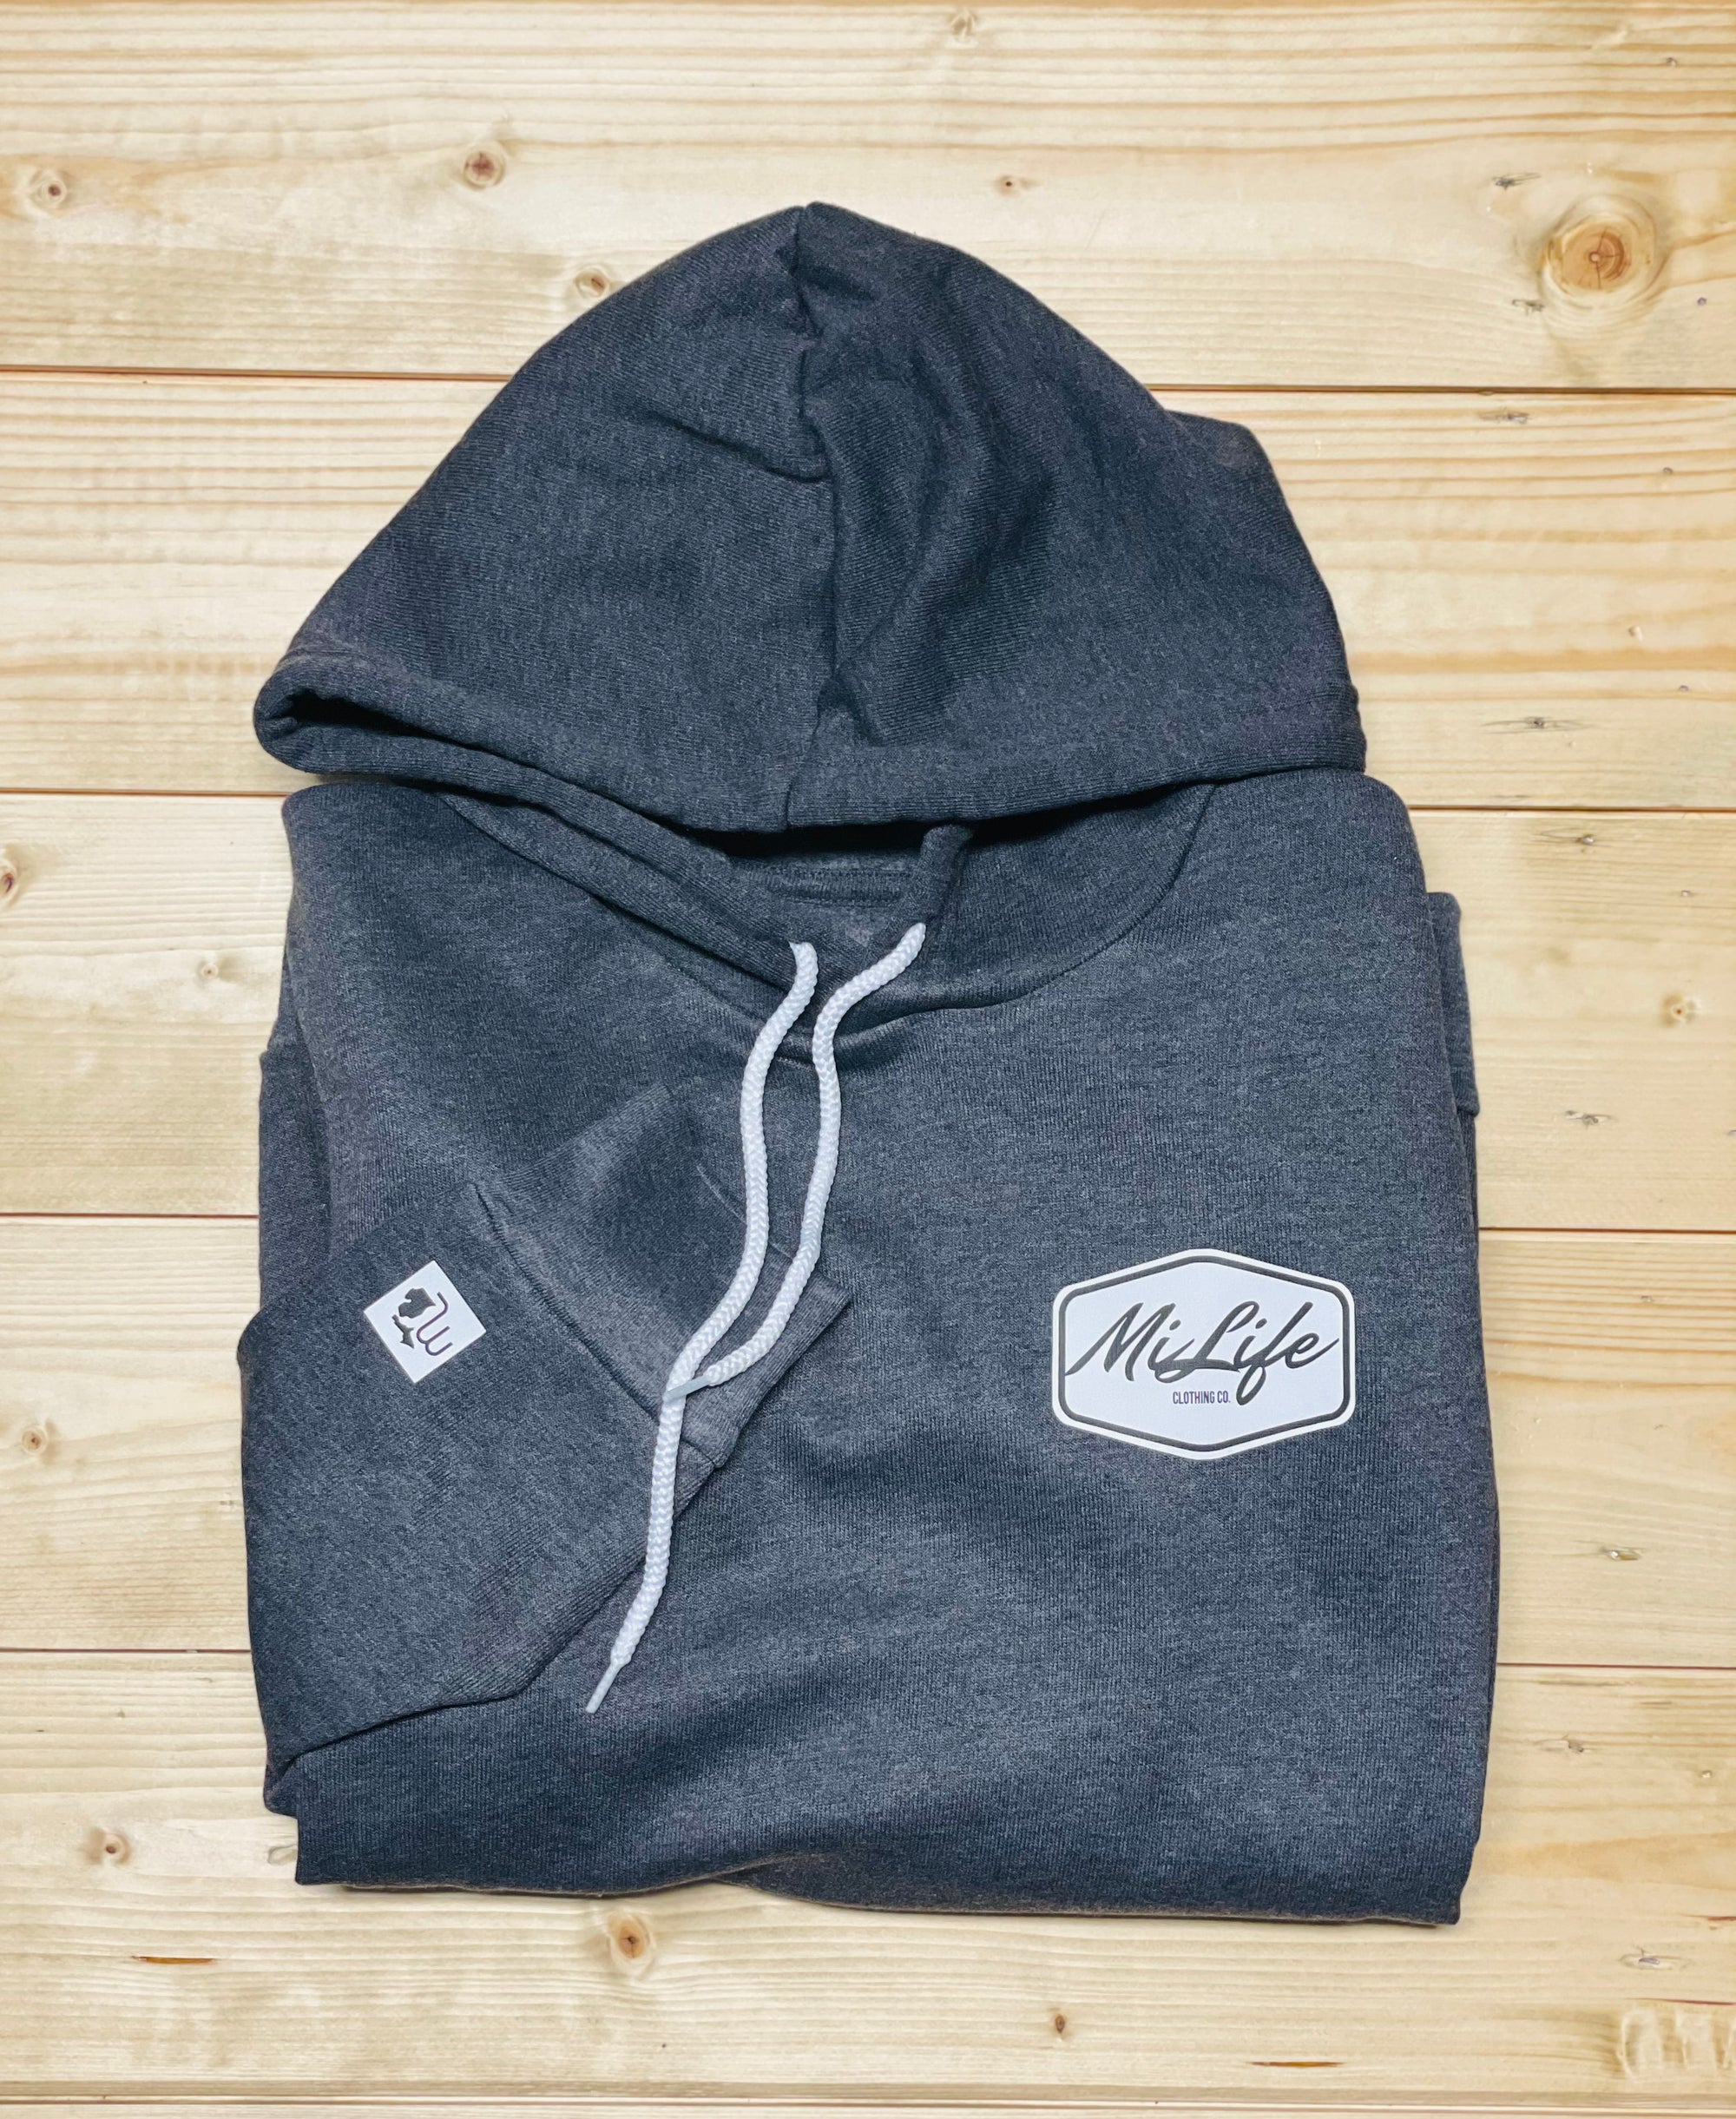 MiLife's most popular crewneck fleece is back just in time for Michigan's summer. If you are walking your dog, skateboarding, out on the boat, of drinking wine at the campfire, our Michigan made MiLife sweatshirts are perfect for any occasion. 